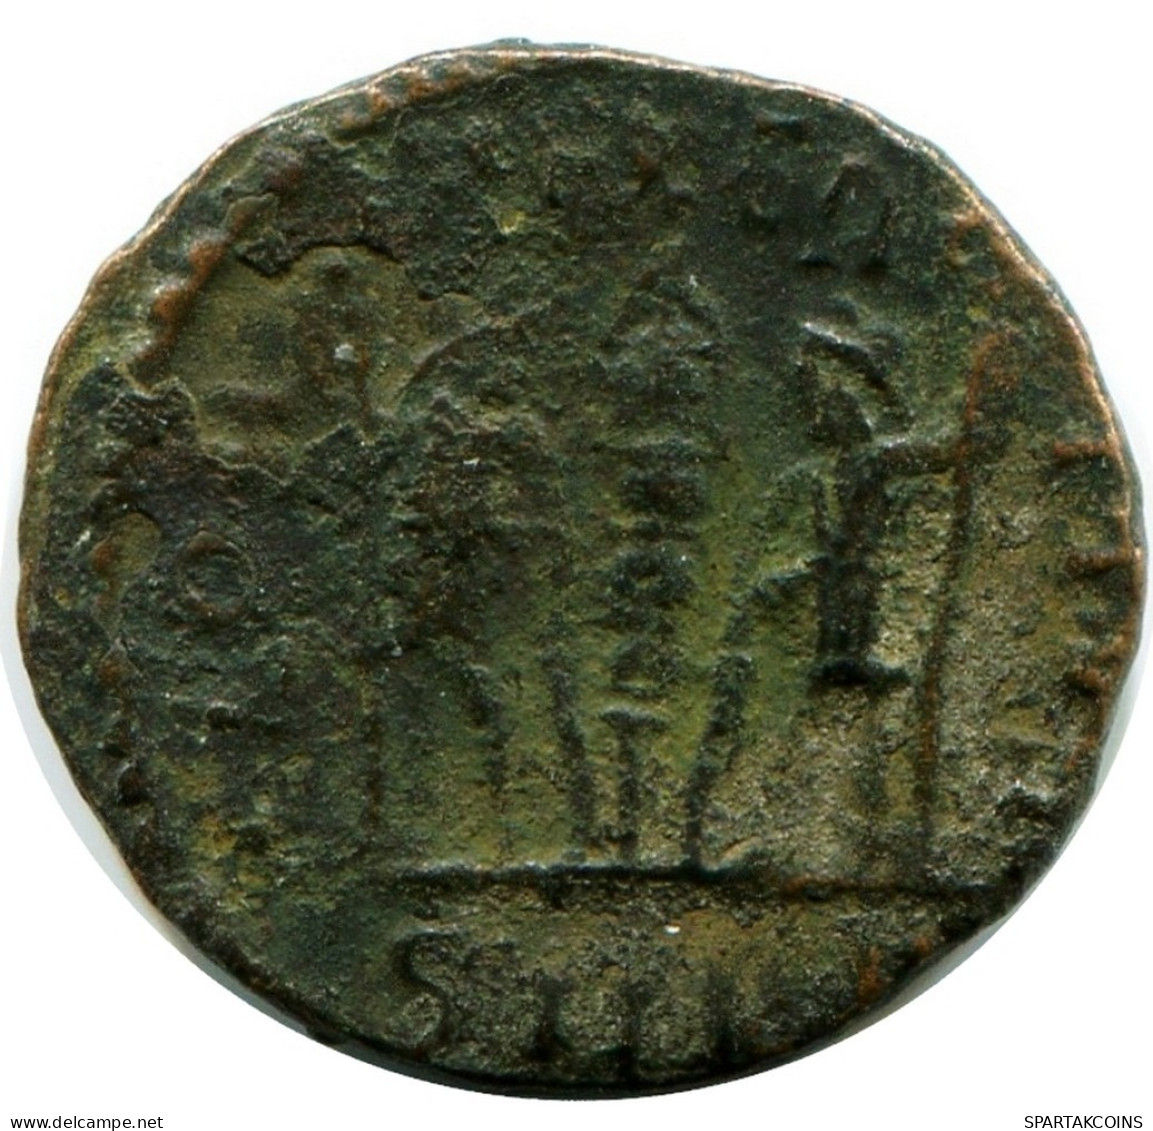 CONSTANS MINTED IN CYZICUS FOUND IN IHNASYAH HOARD EGYPT #ANC11594.14.U.A - The Christian Empire (307 AD Tot 363 AD)